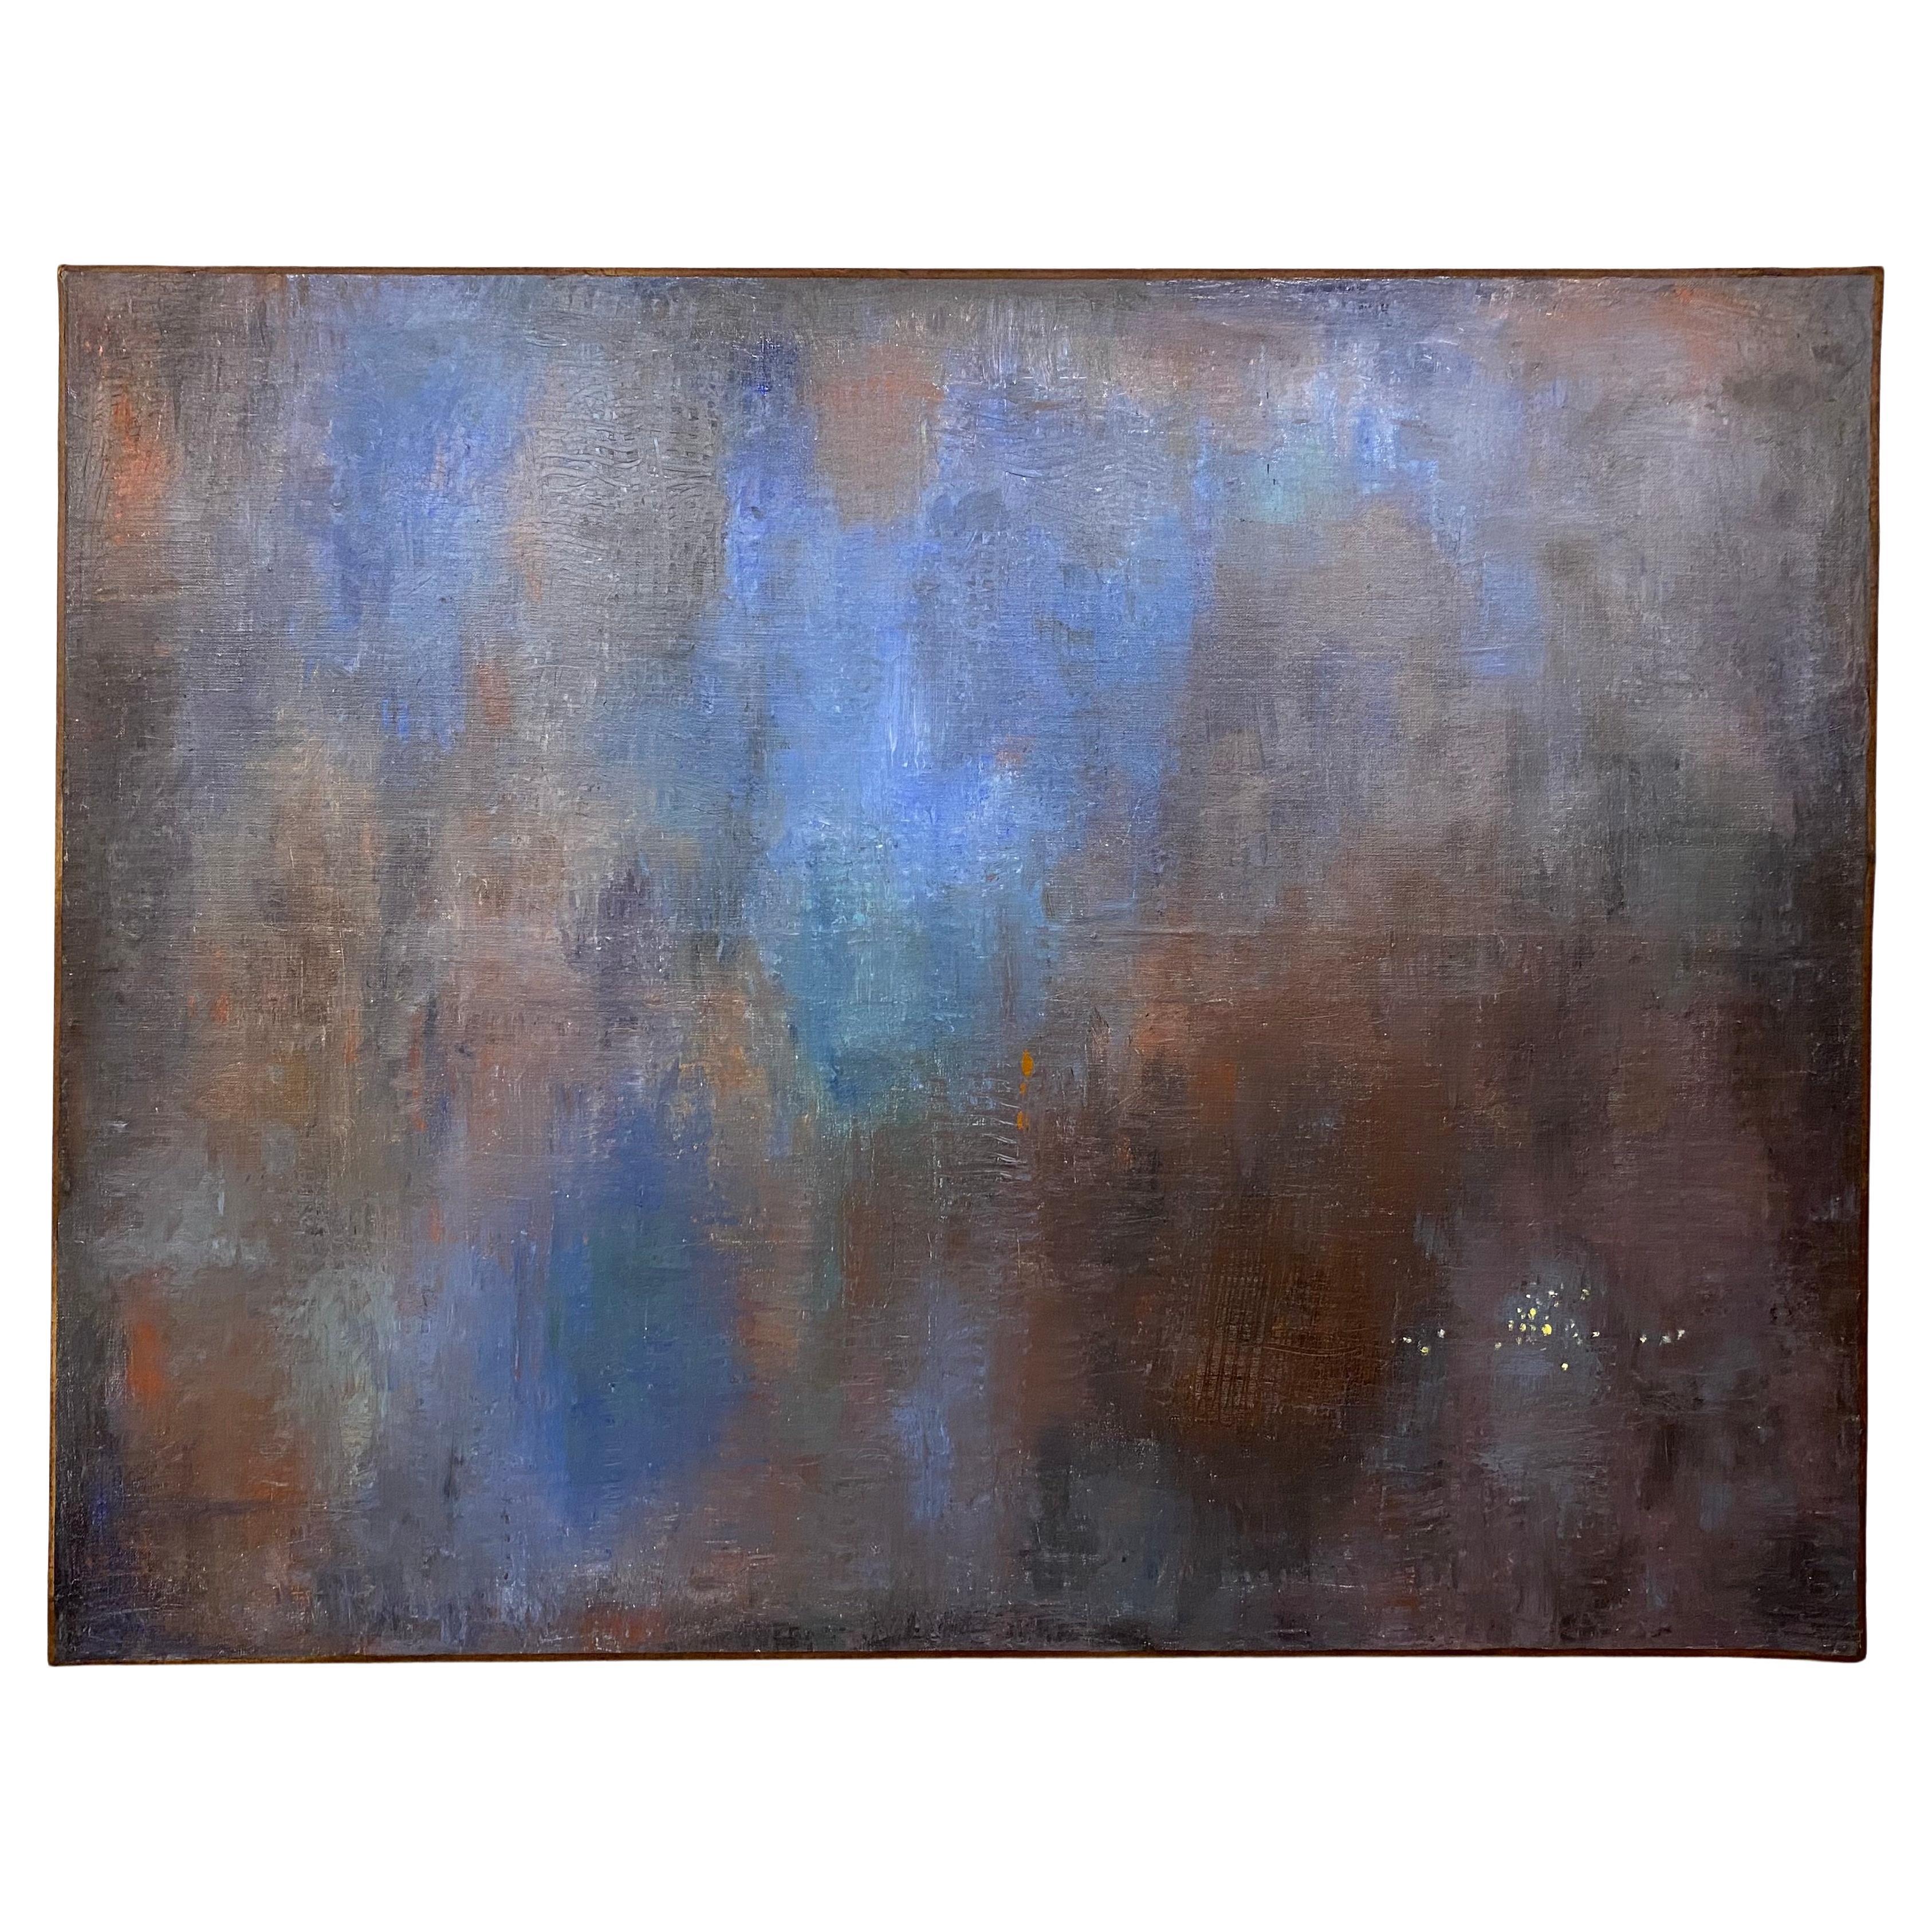 Large Abstract Oil on Canvas Painting, Prominent Blue